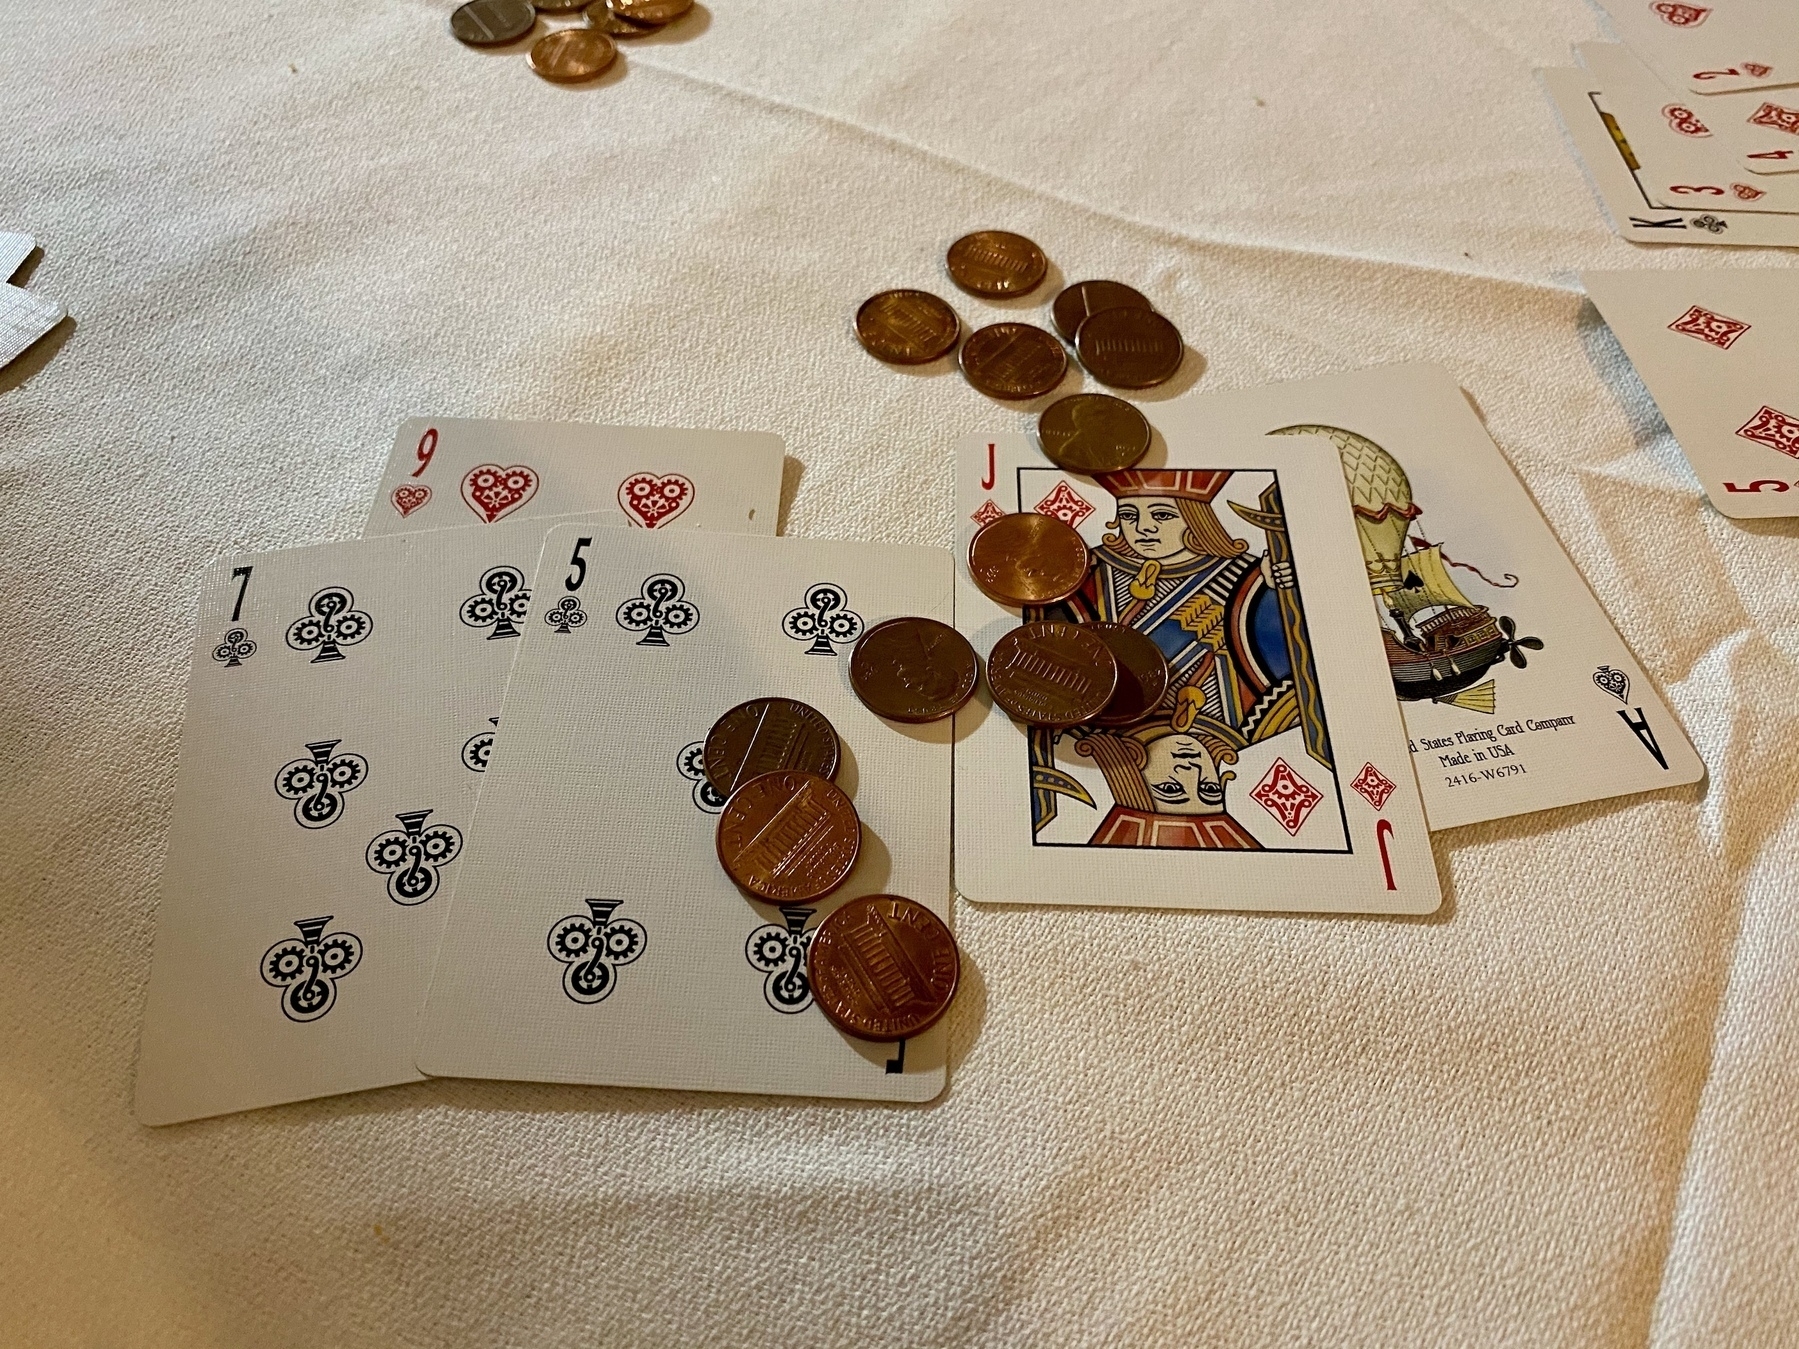 Cards (9 of hearts, 7 and 5 of clubs on one side, with the Jack of diamonds and the Ace of spades on the other side) on a white tablecloth, with pennies on top of them.